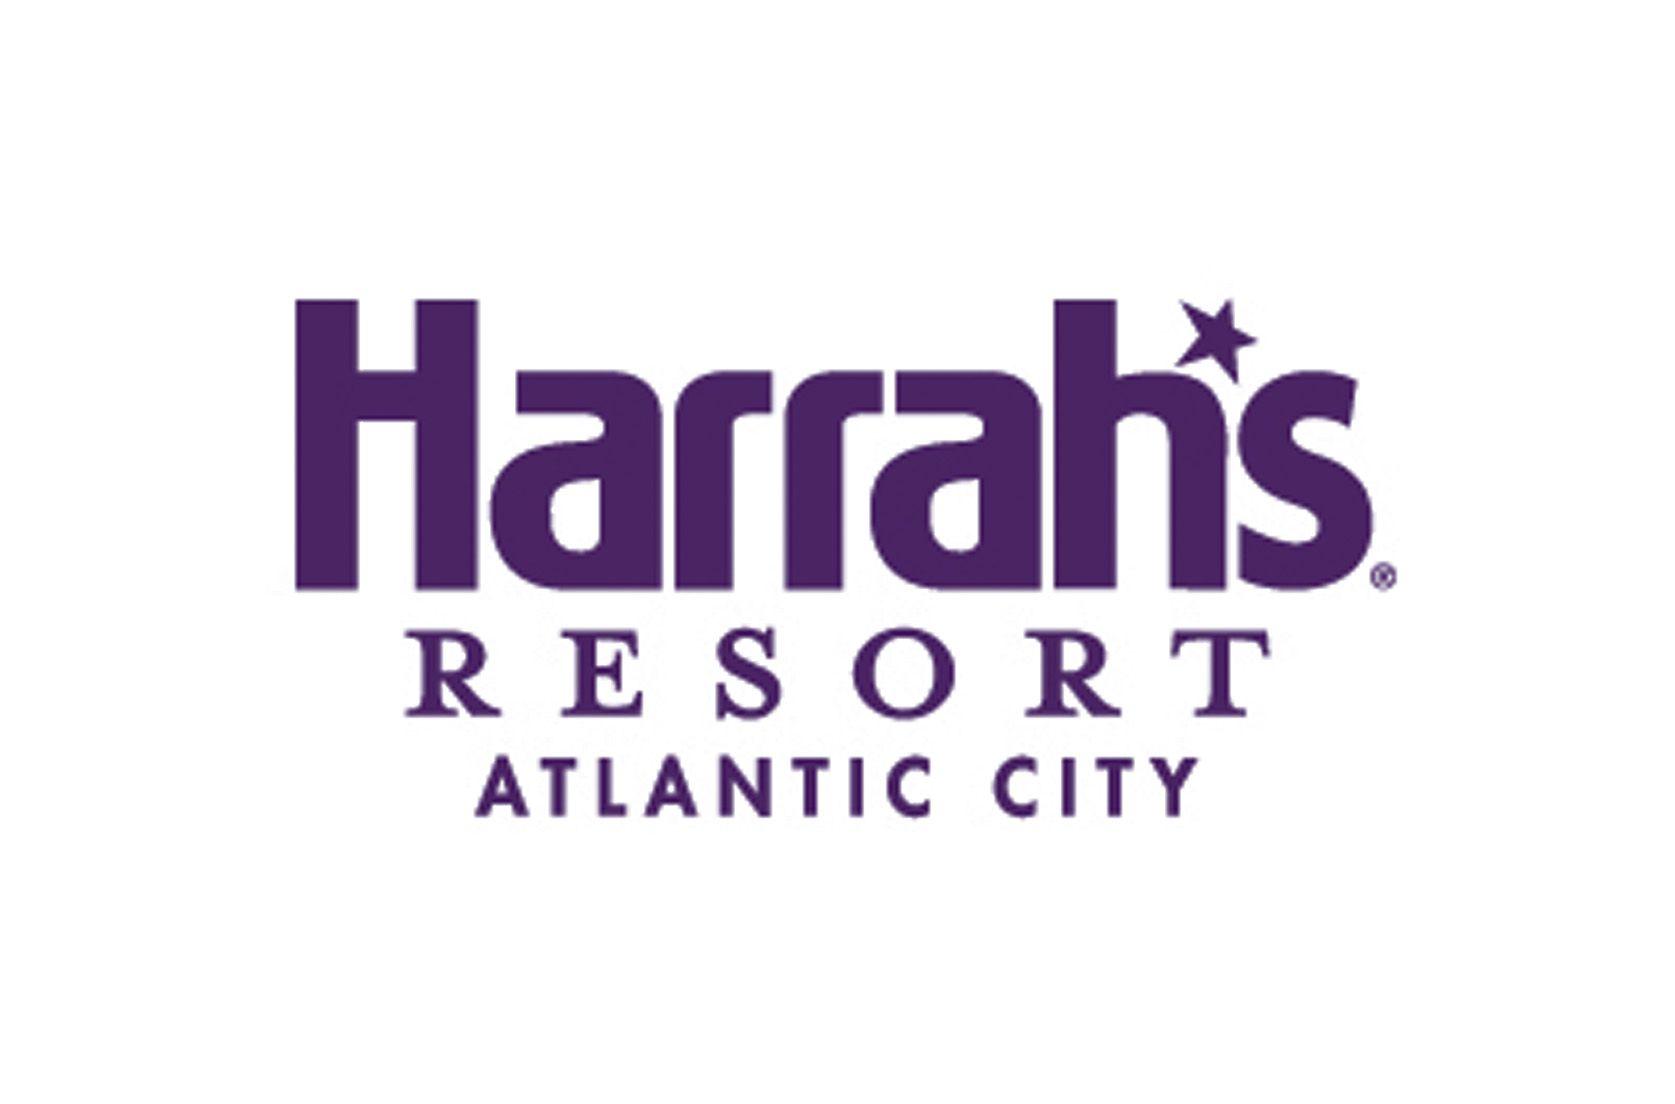 Atlantic City Logo - NJPhA Annual Meeting & Convention - New Jersey Pharmacists Association